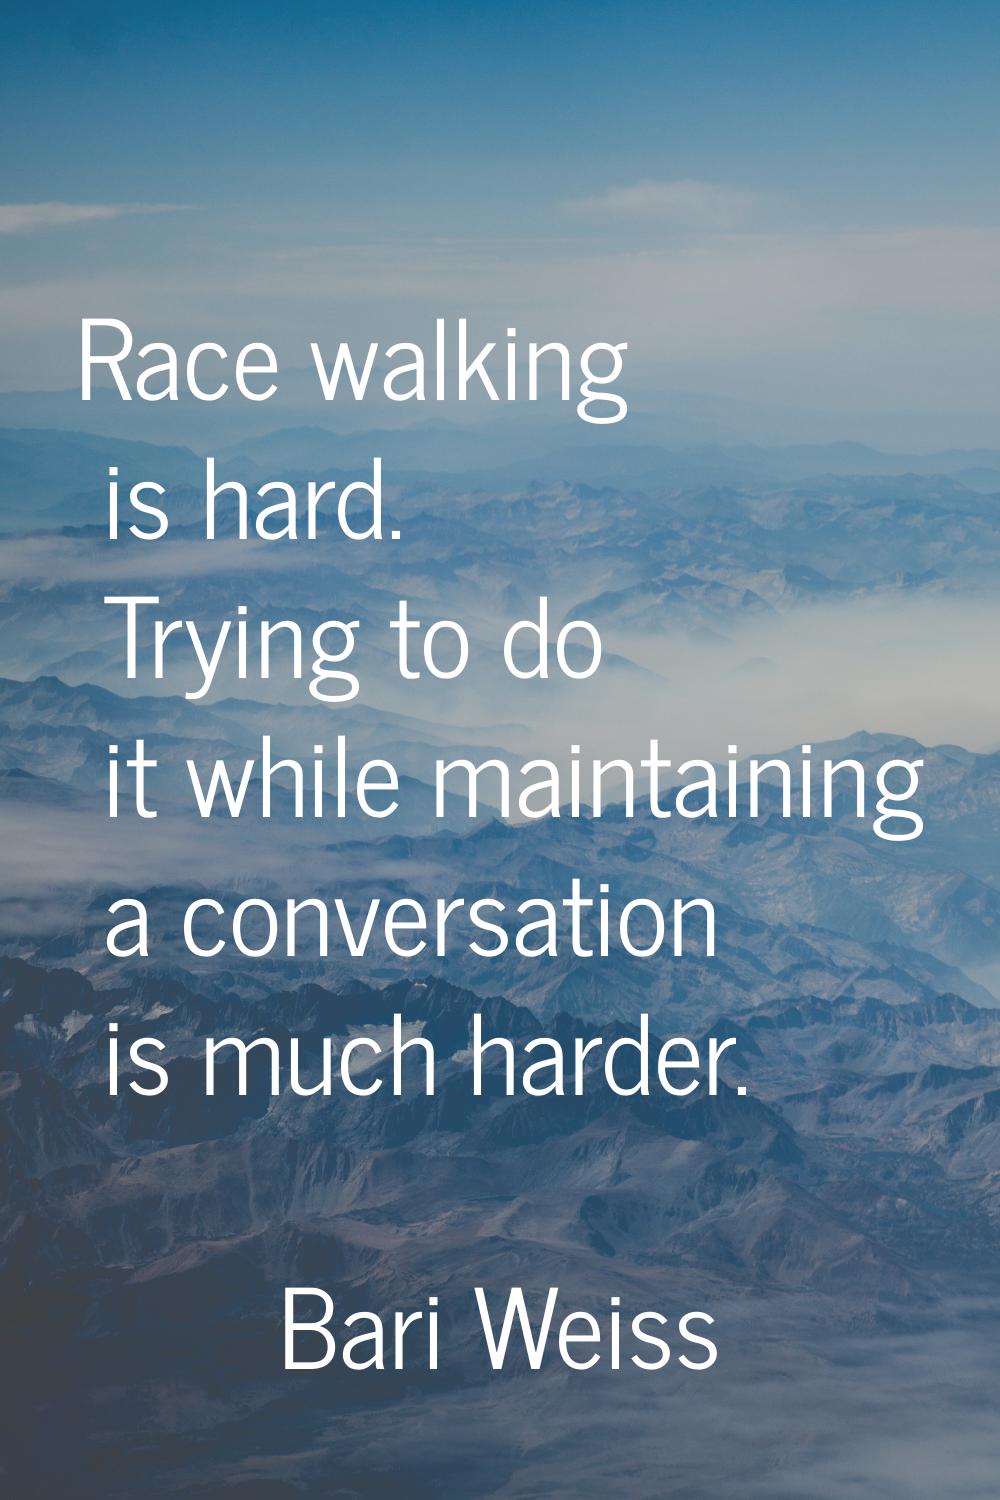 Race walking is hard. Trying to do it while maintaining a conversation is much harder.